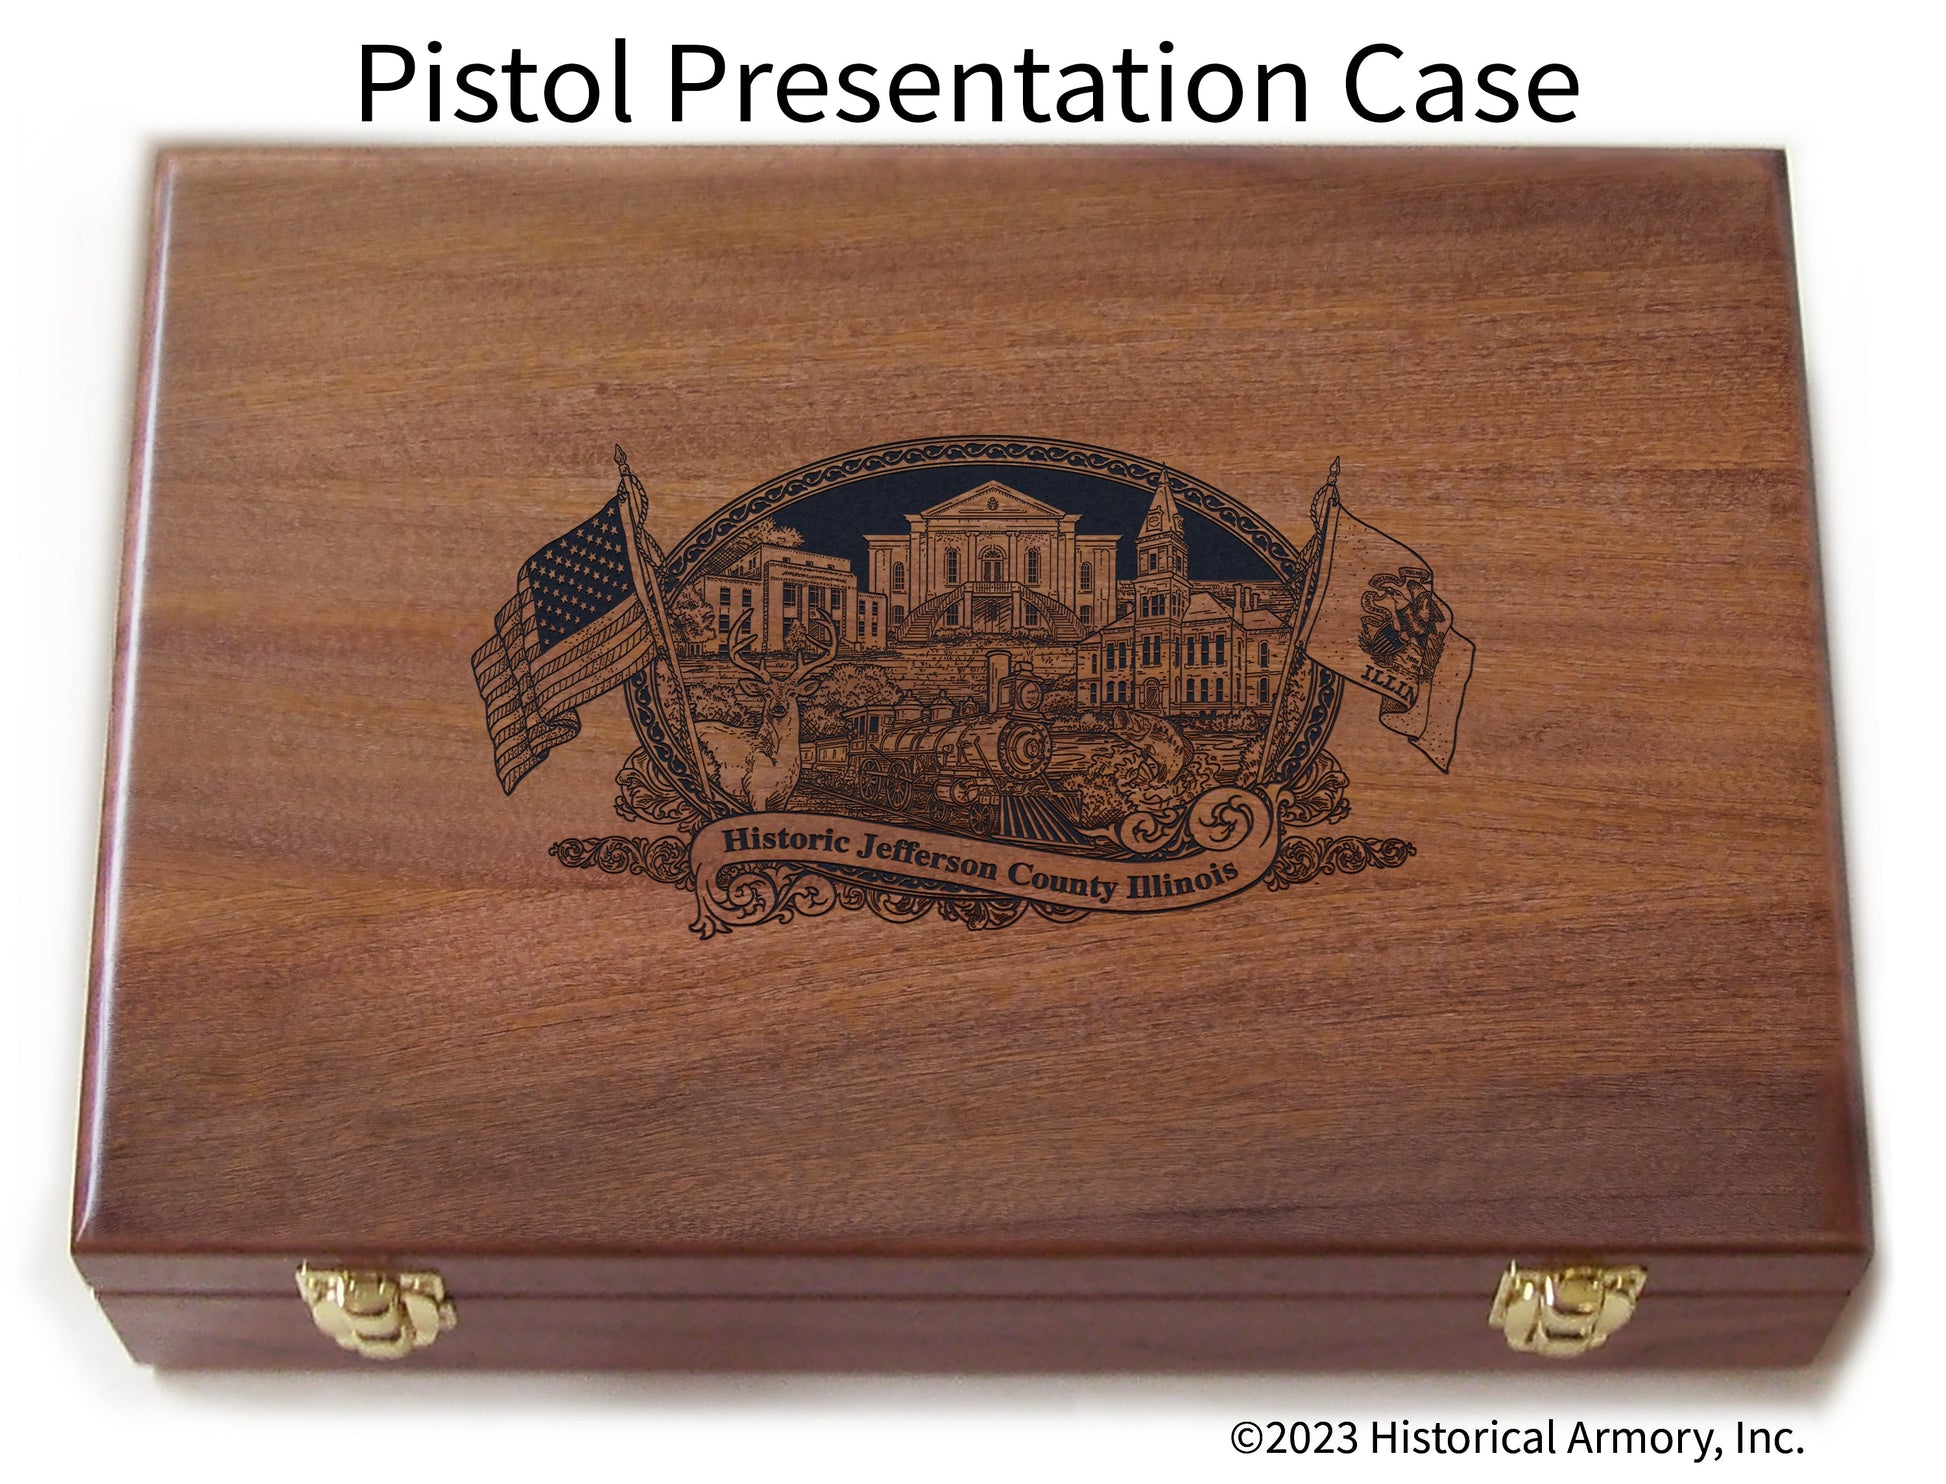 Jefferson County Illinois Engraved .45 Auto Ruger 1911 Presentation Case